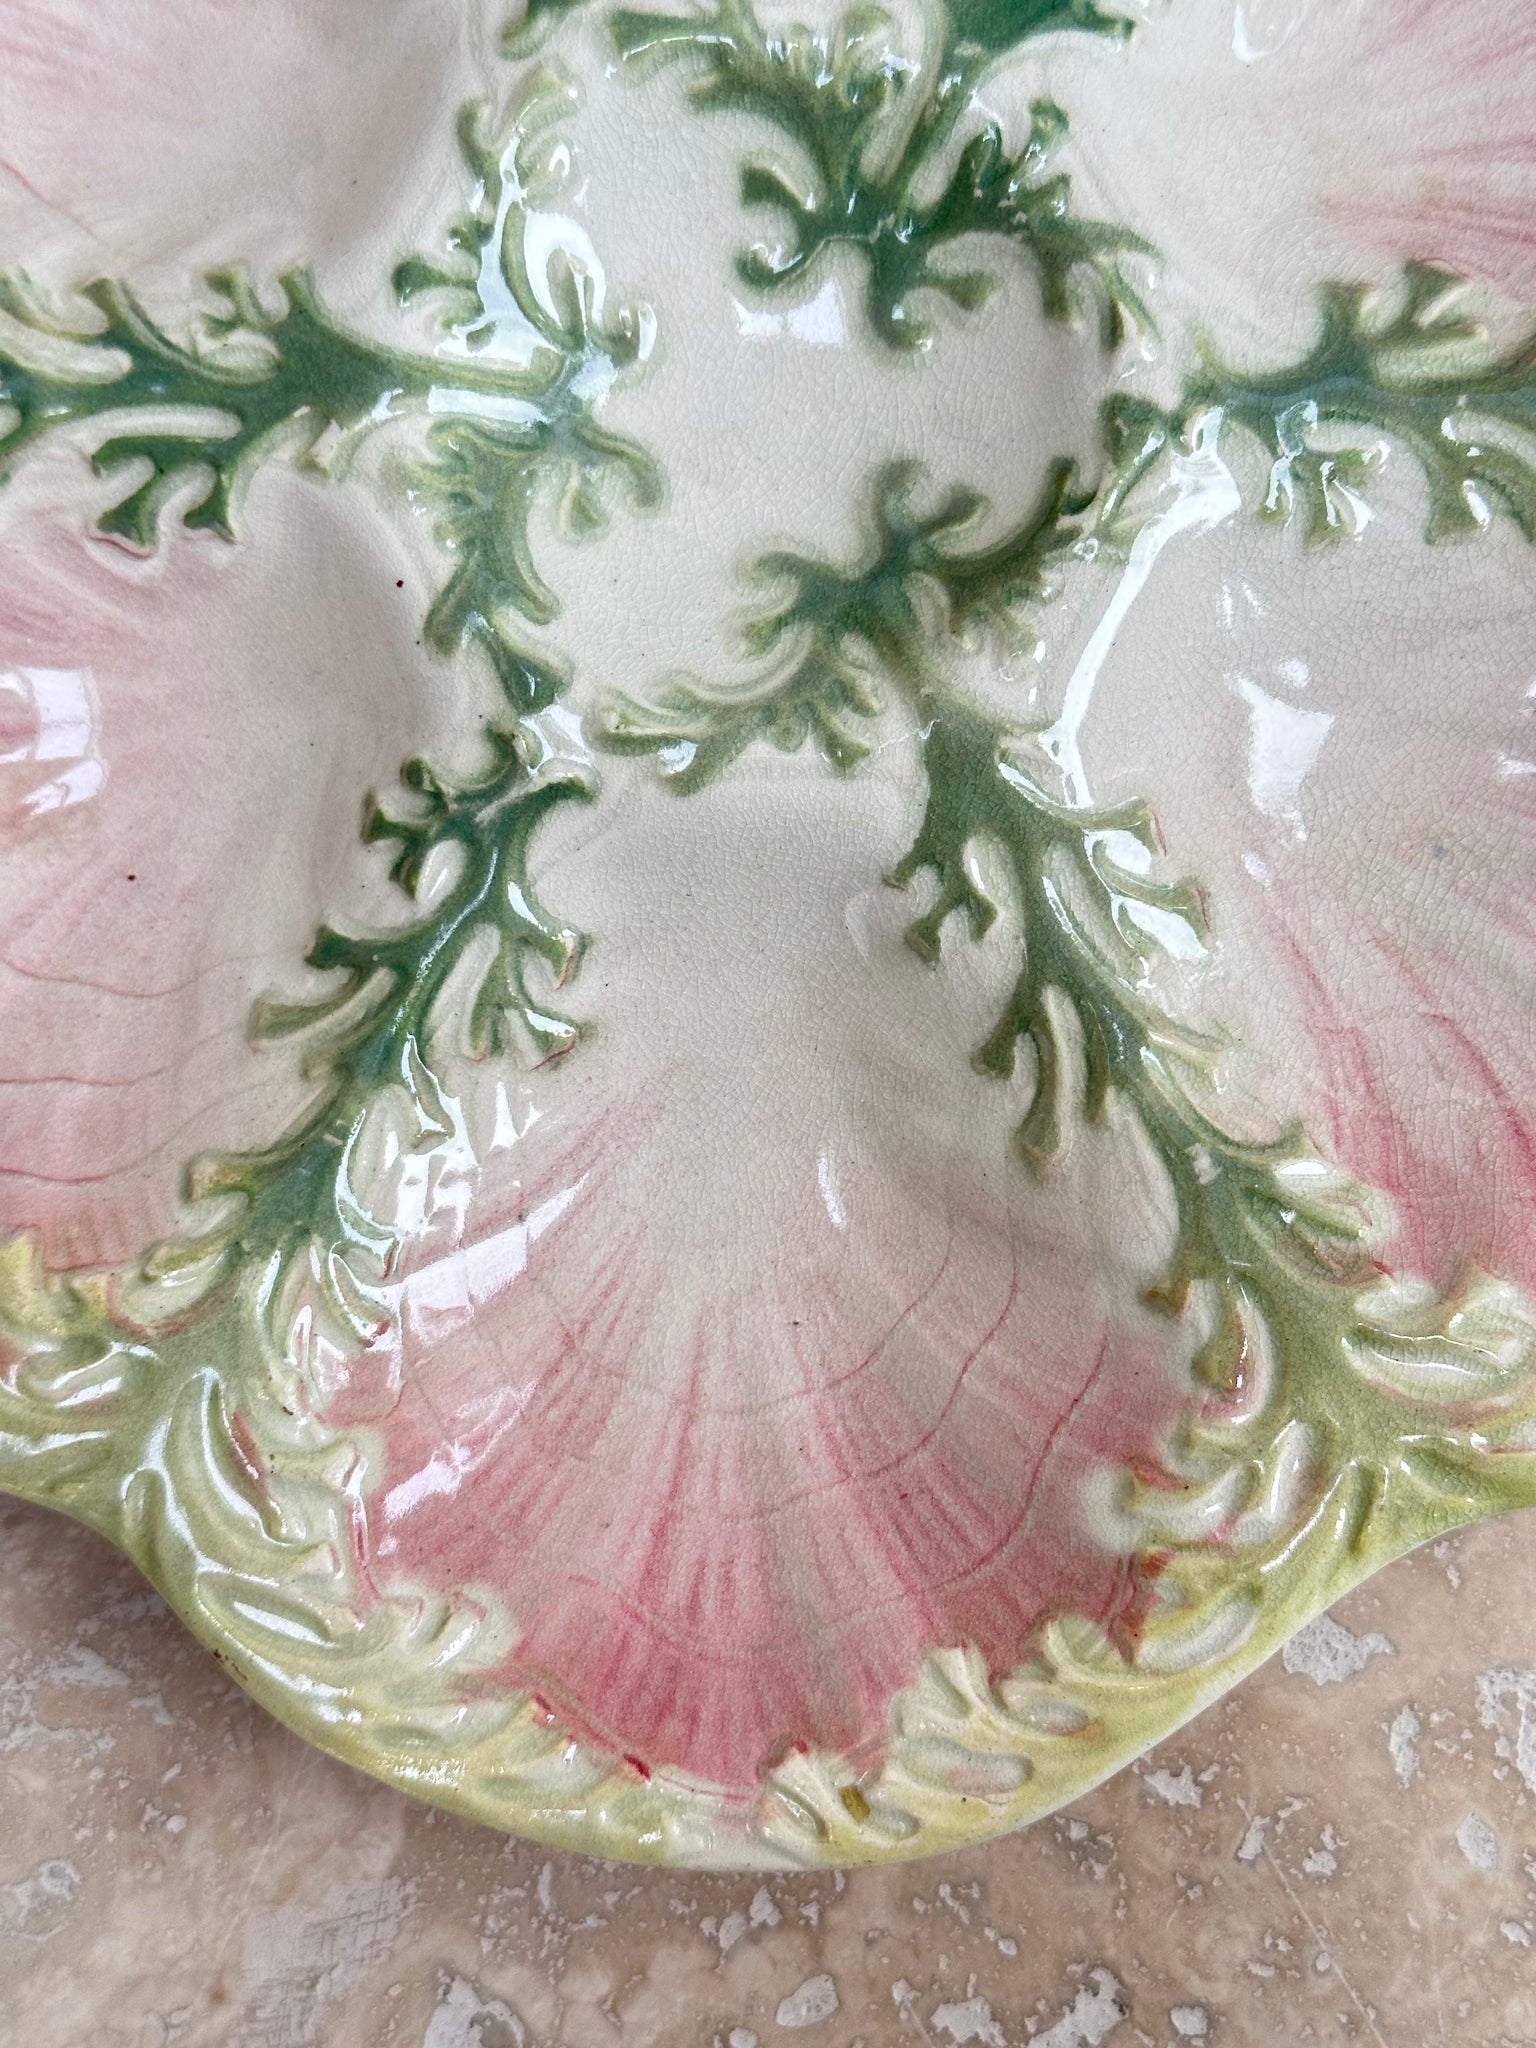 Green Seaweed and Pink Shell Plate